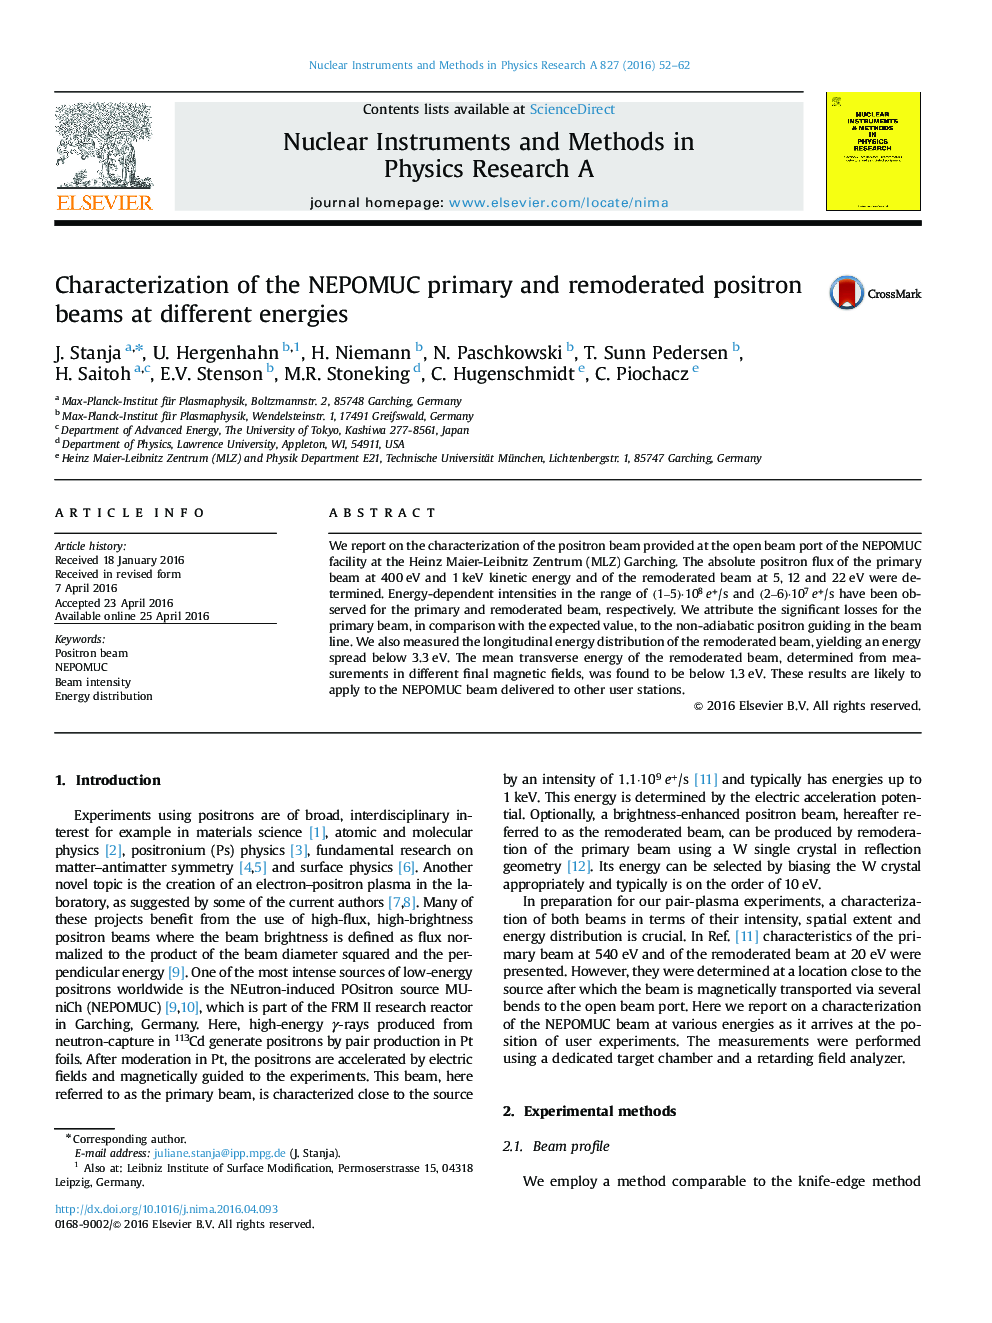 Characterization of the NEPOMUC primary and remoderated positron beams at different energies